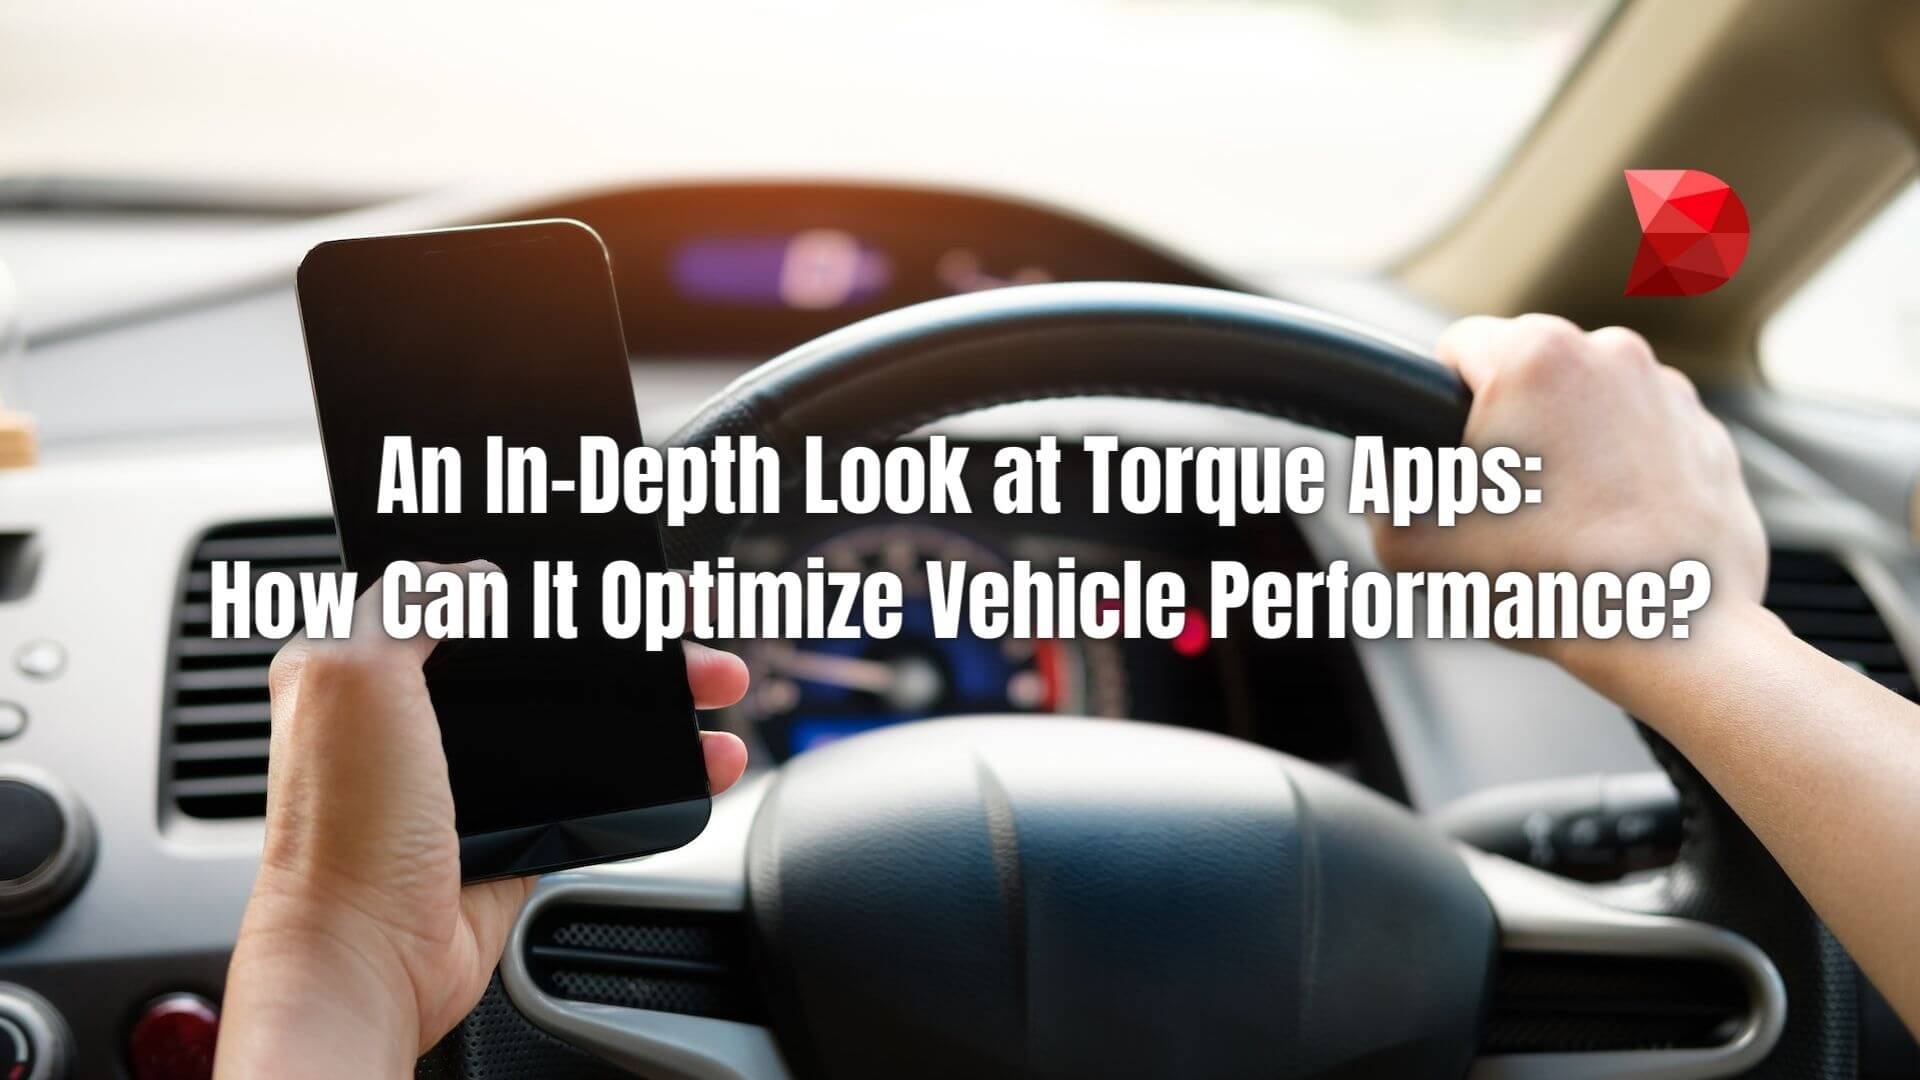 A Torque App is a cutting-edge mobile application designed to interface with a vehicle's On-Board Diagnostic (OBD) system. Learn more!